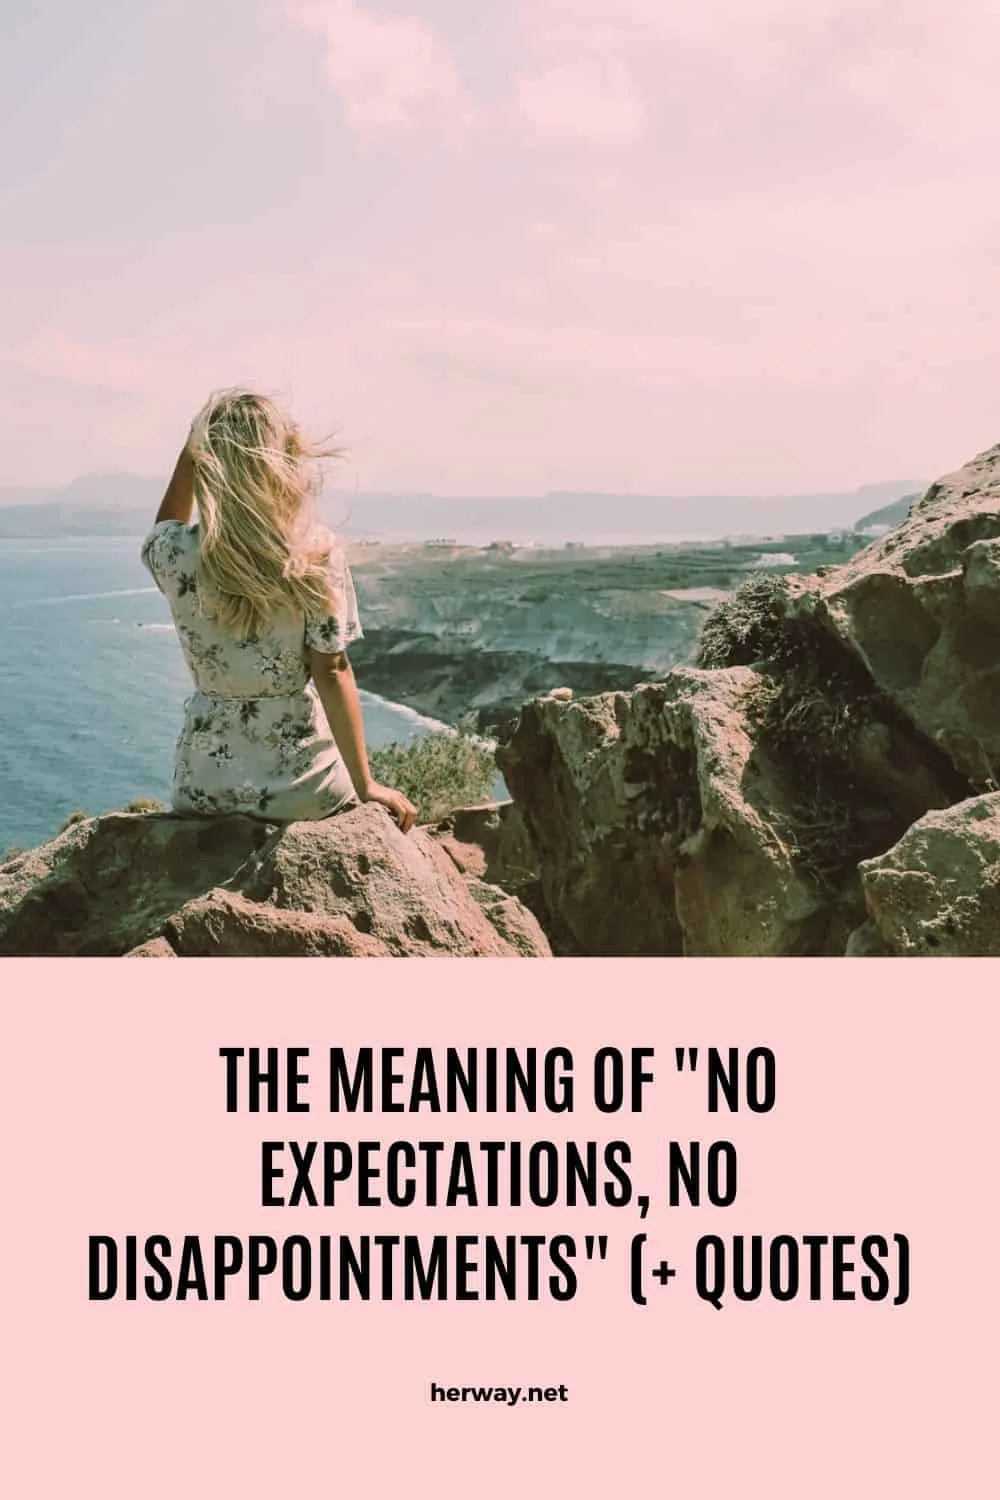 The Meaning Of "No Expectations, No Disappointments" (+ Quotes)